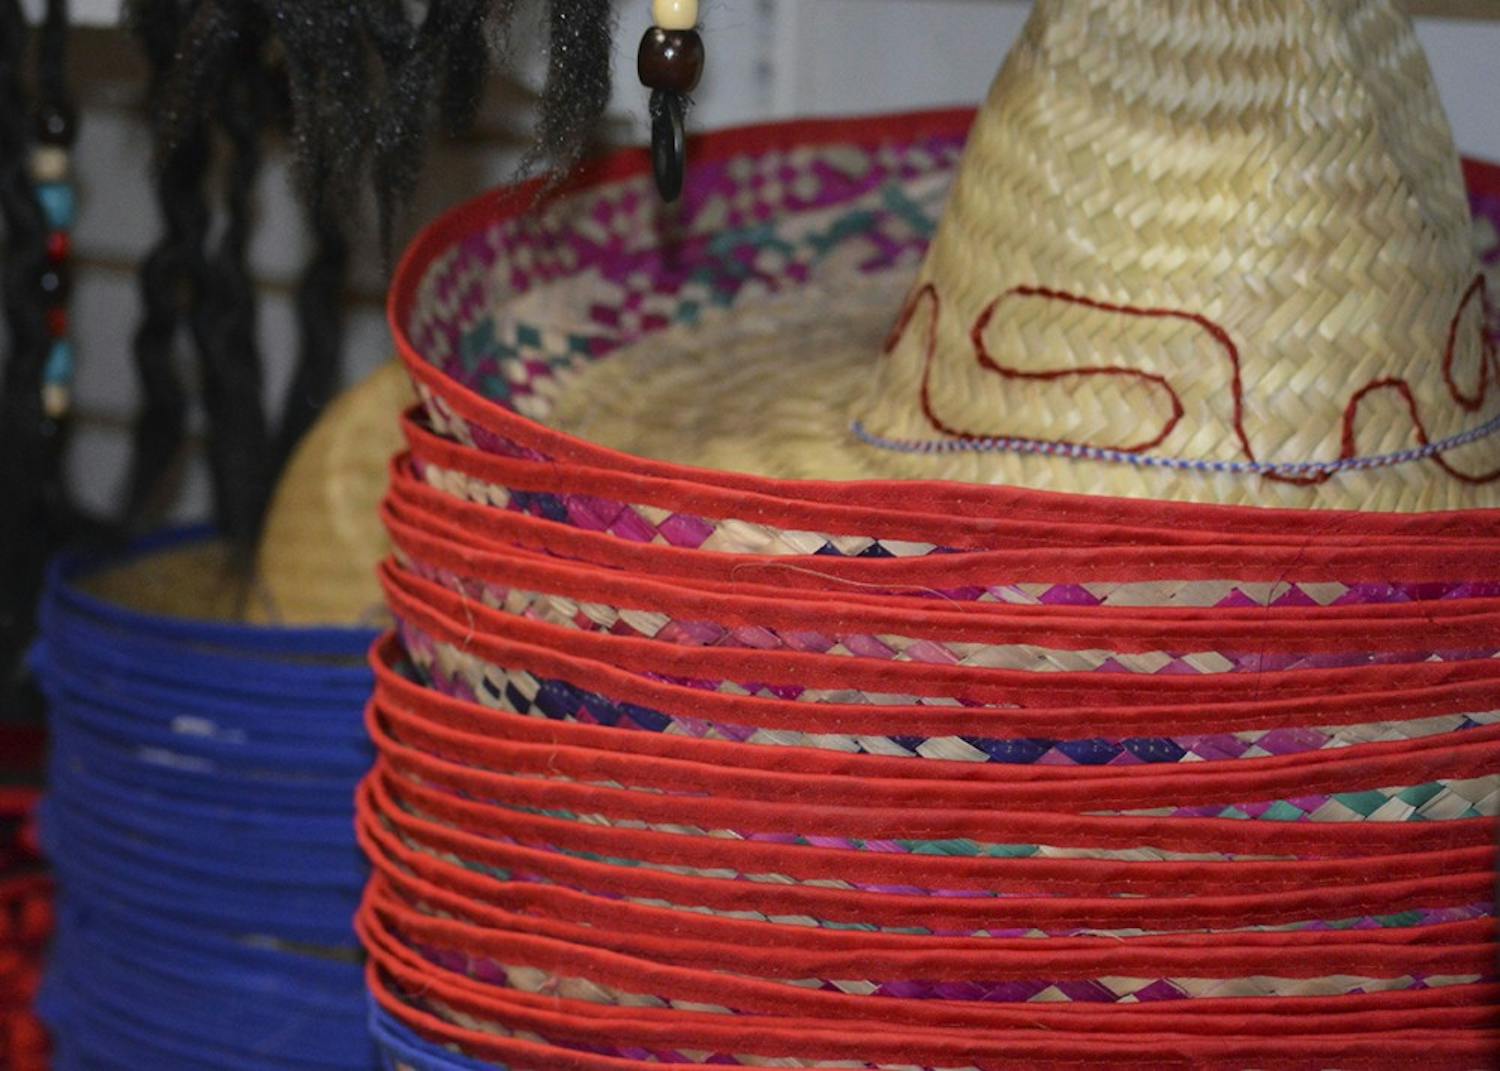 Sombreros sit on shelves along with other hats for Halloween at Campus Costume.&nbsp;